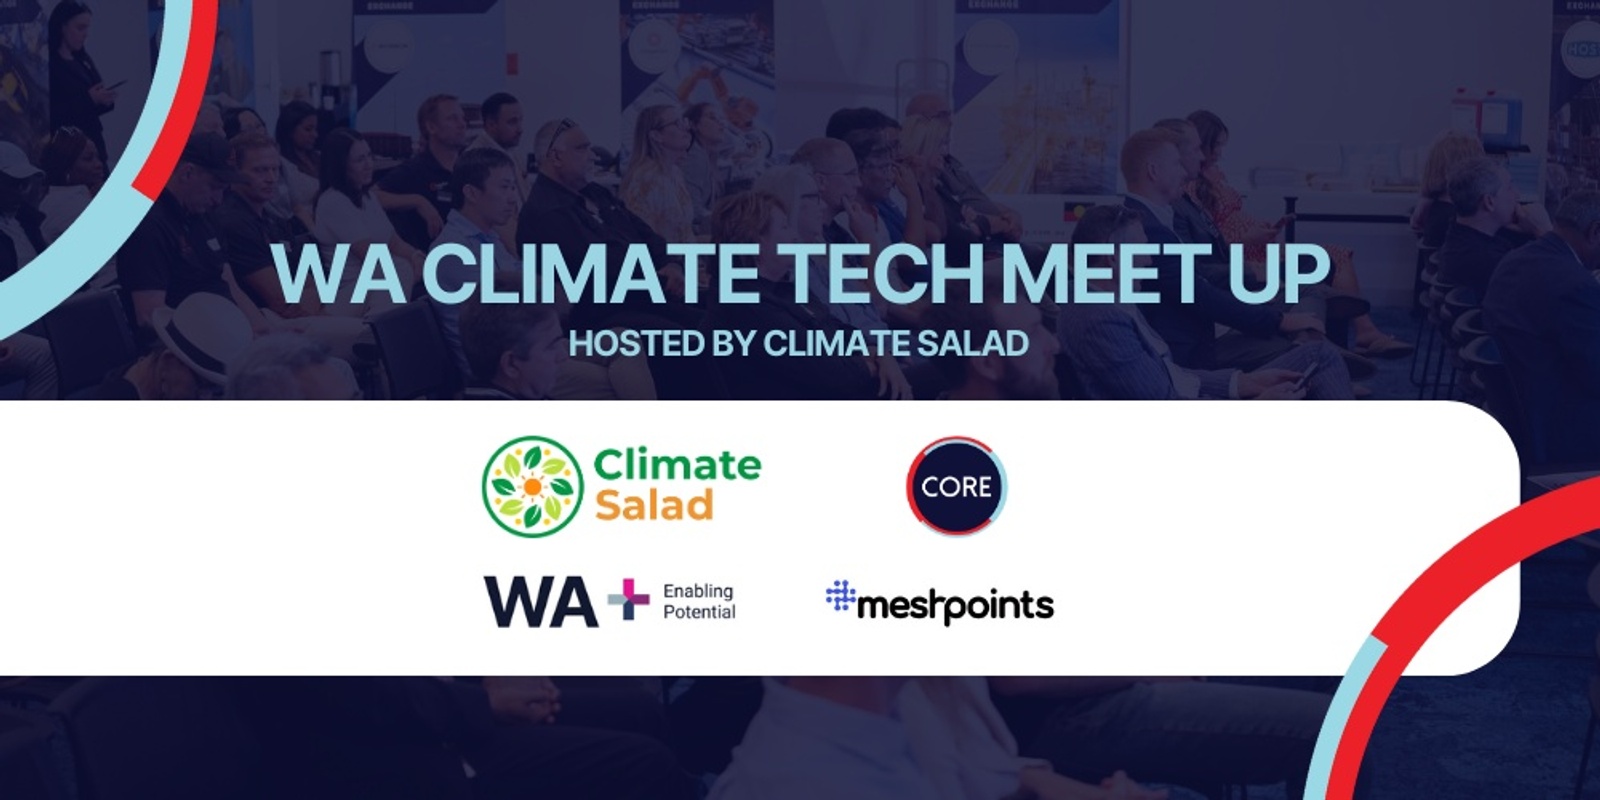 Banner image for WA Climate Tech Meet Up powered by Climate Salad, WA+ & CORE